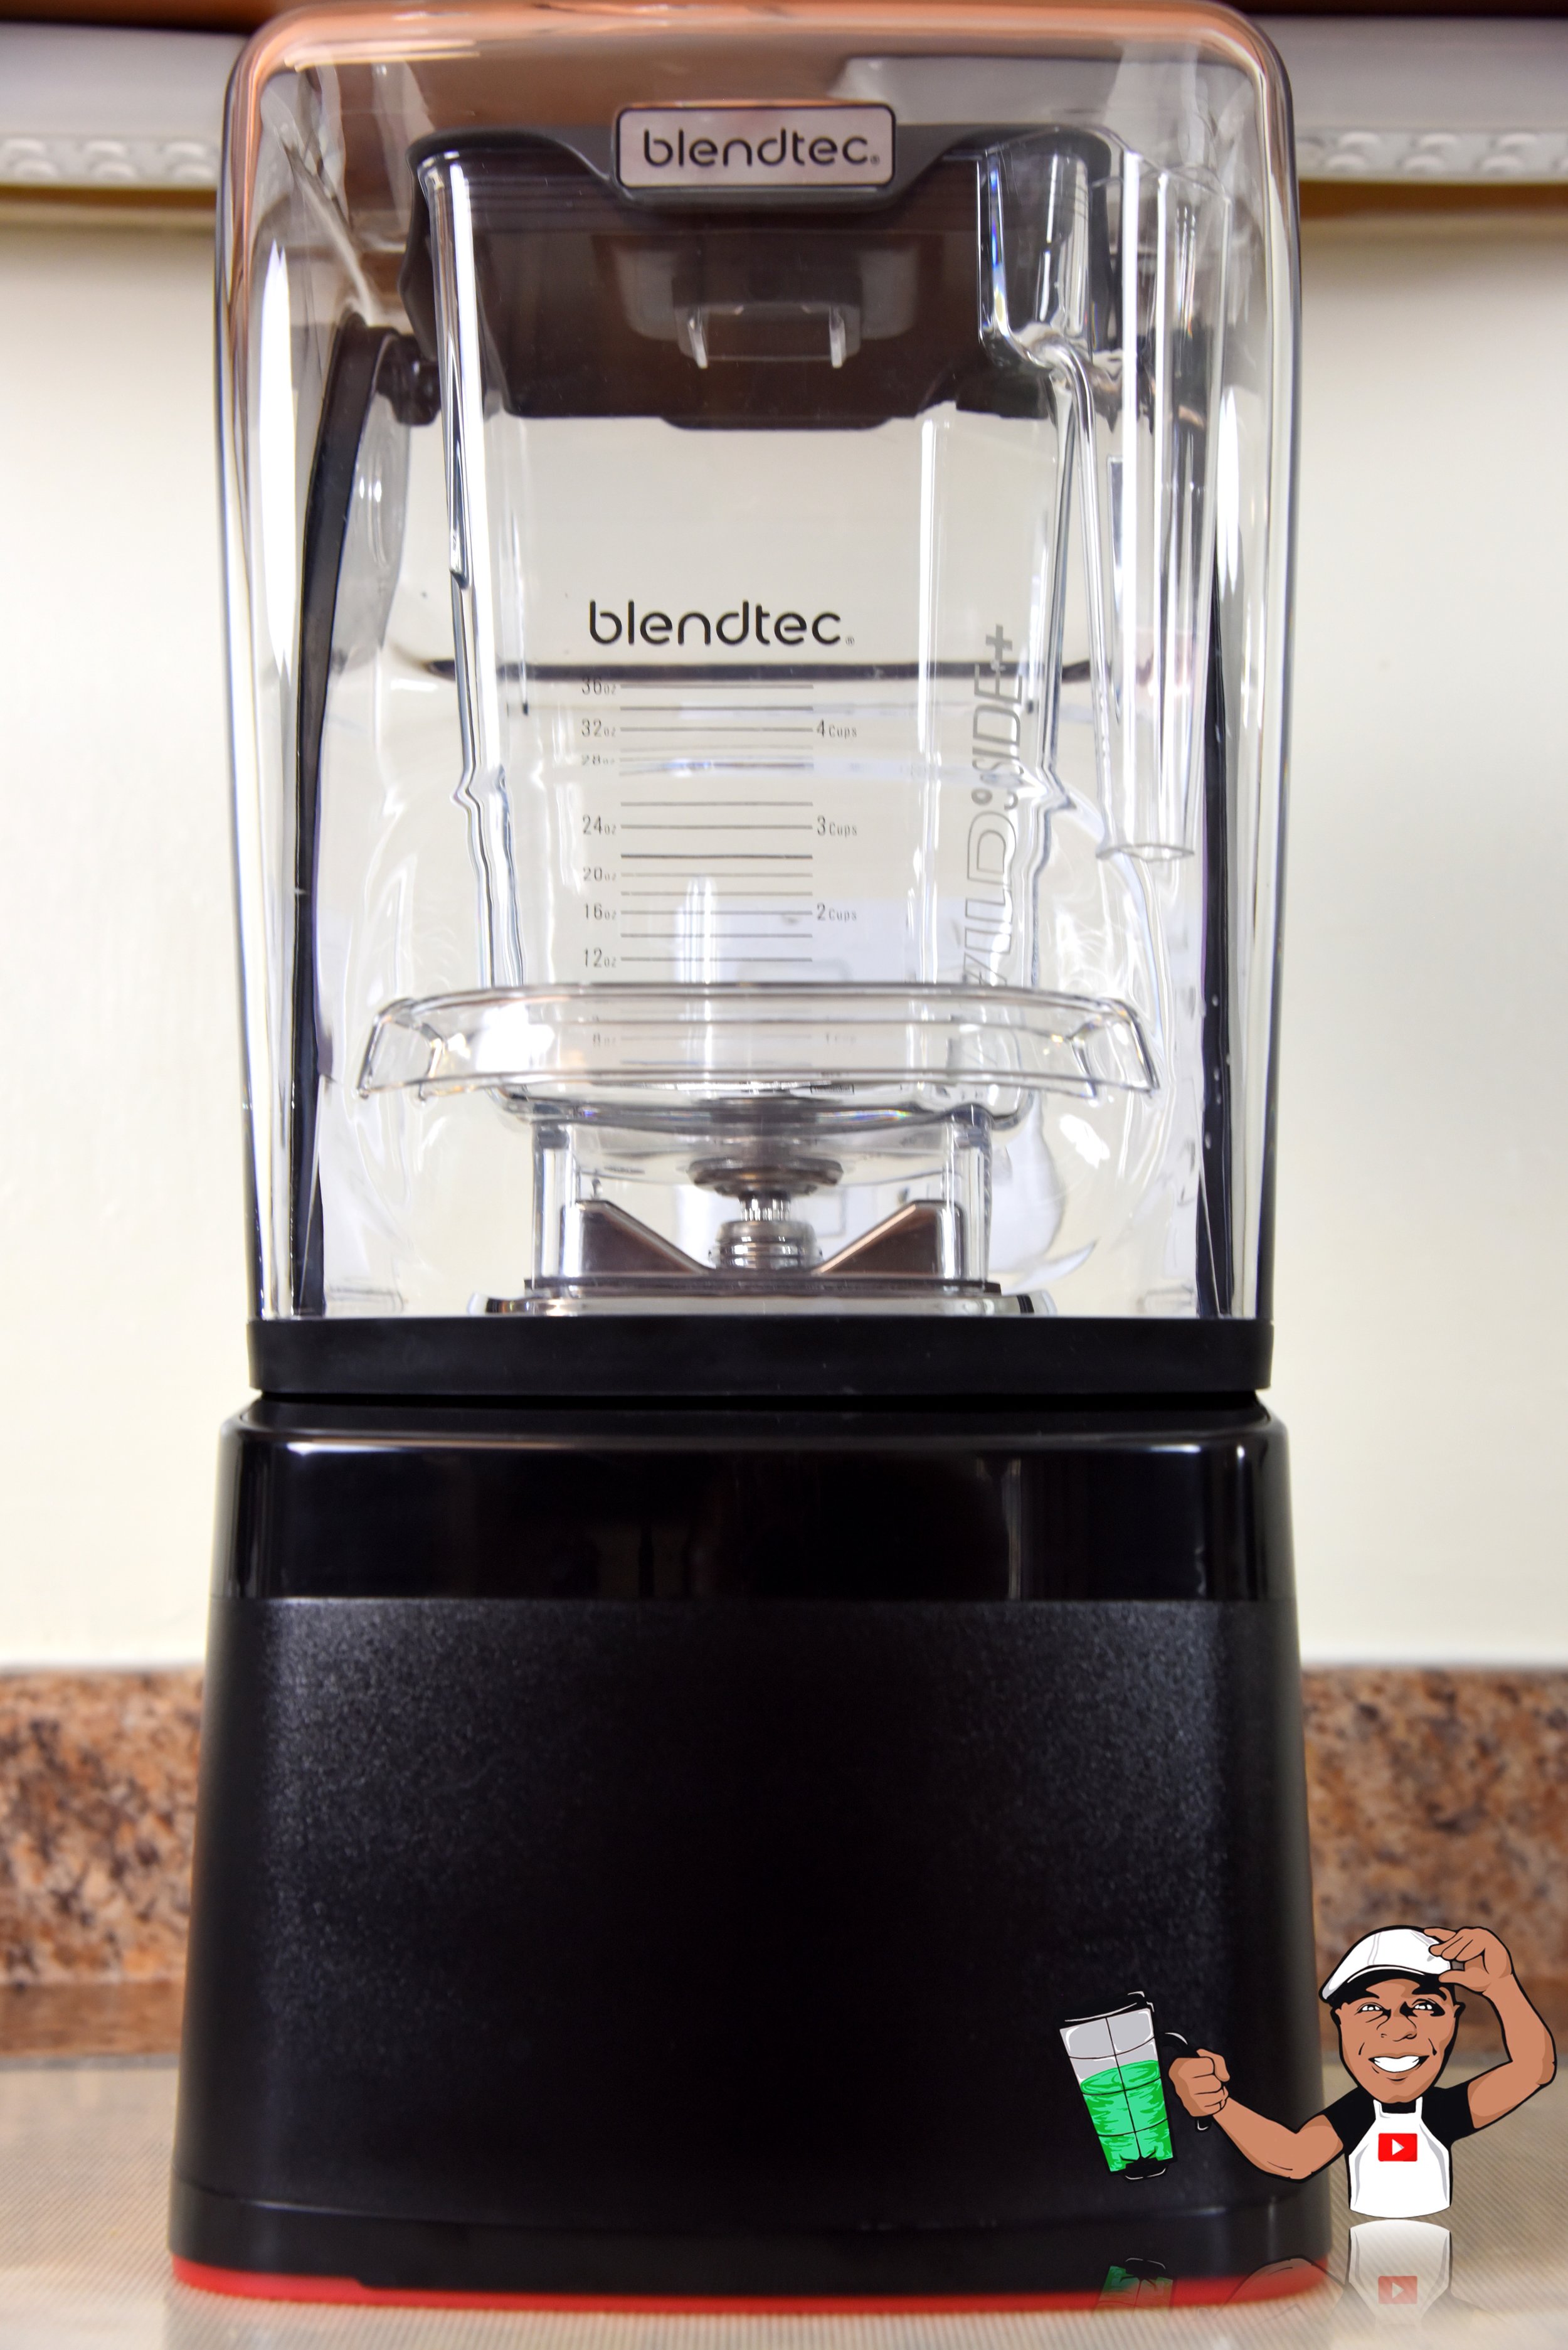 Blendtec Professional 800 Full Review Blending With Henry Get Original Recipes Reviews And Discounts Off Of Premium Blenders Shipping To Canada The United States And The Uk